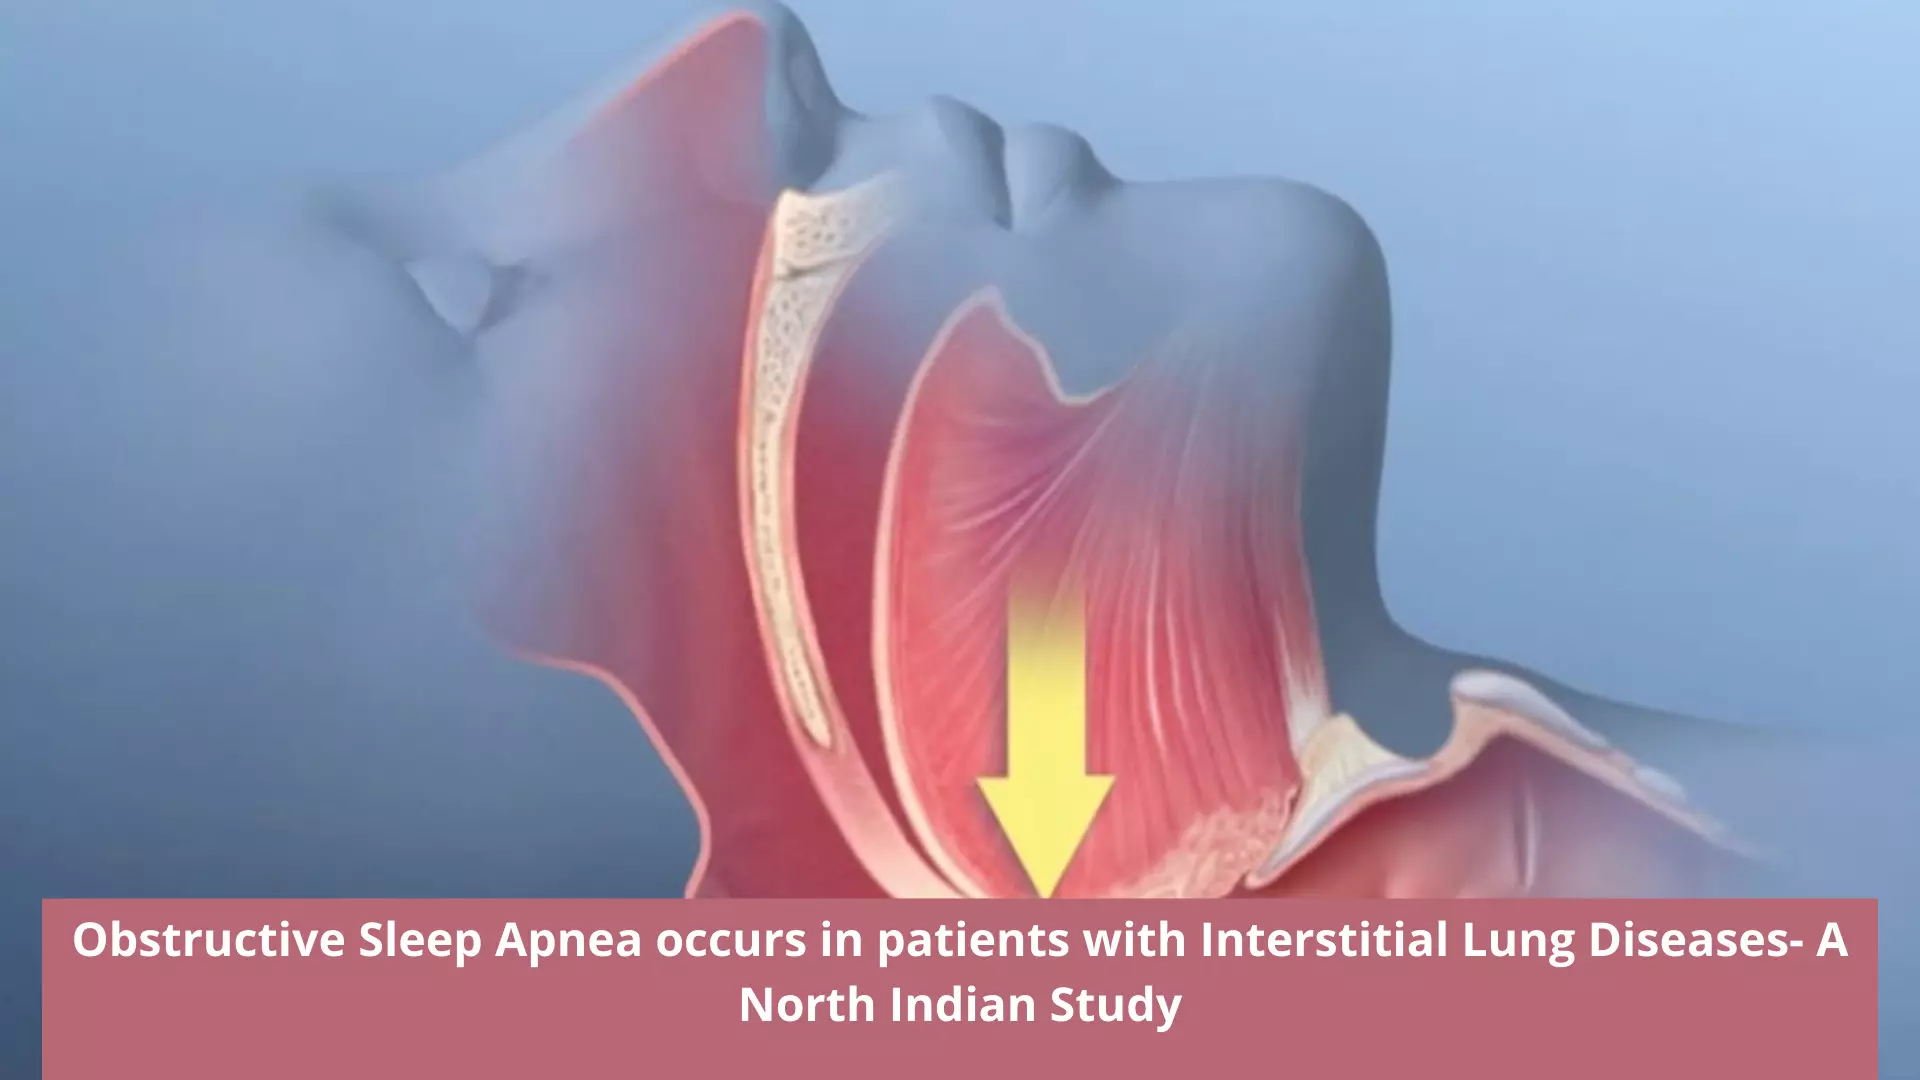 Obstructive Sleep Apnea occurs in patients with Interstitial Lung Diseases- A North Indian Study